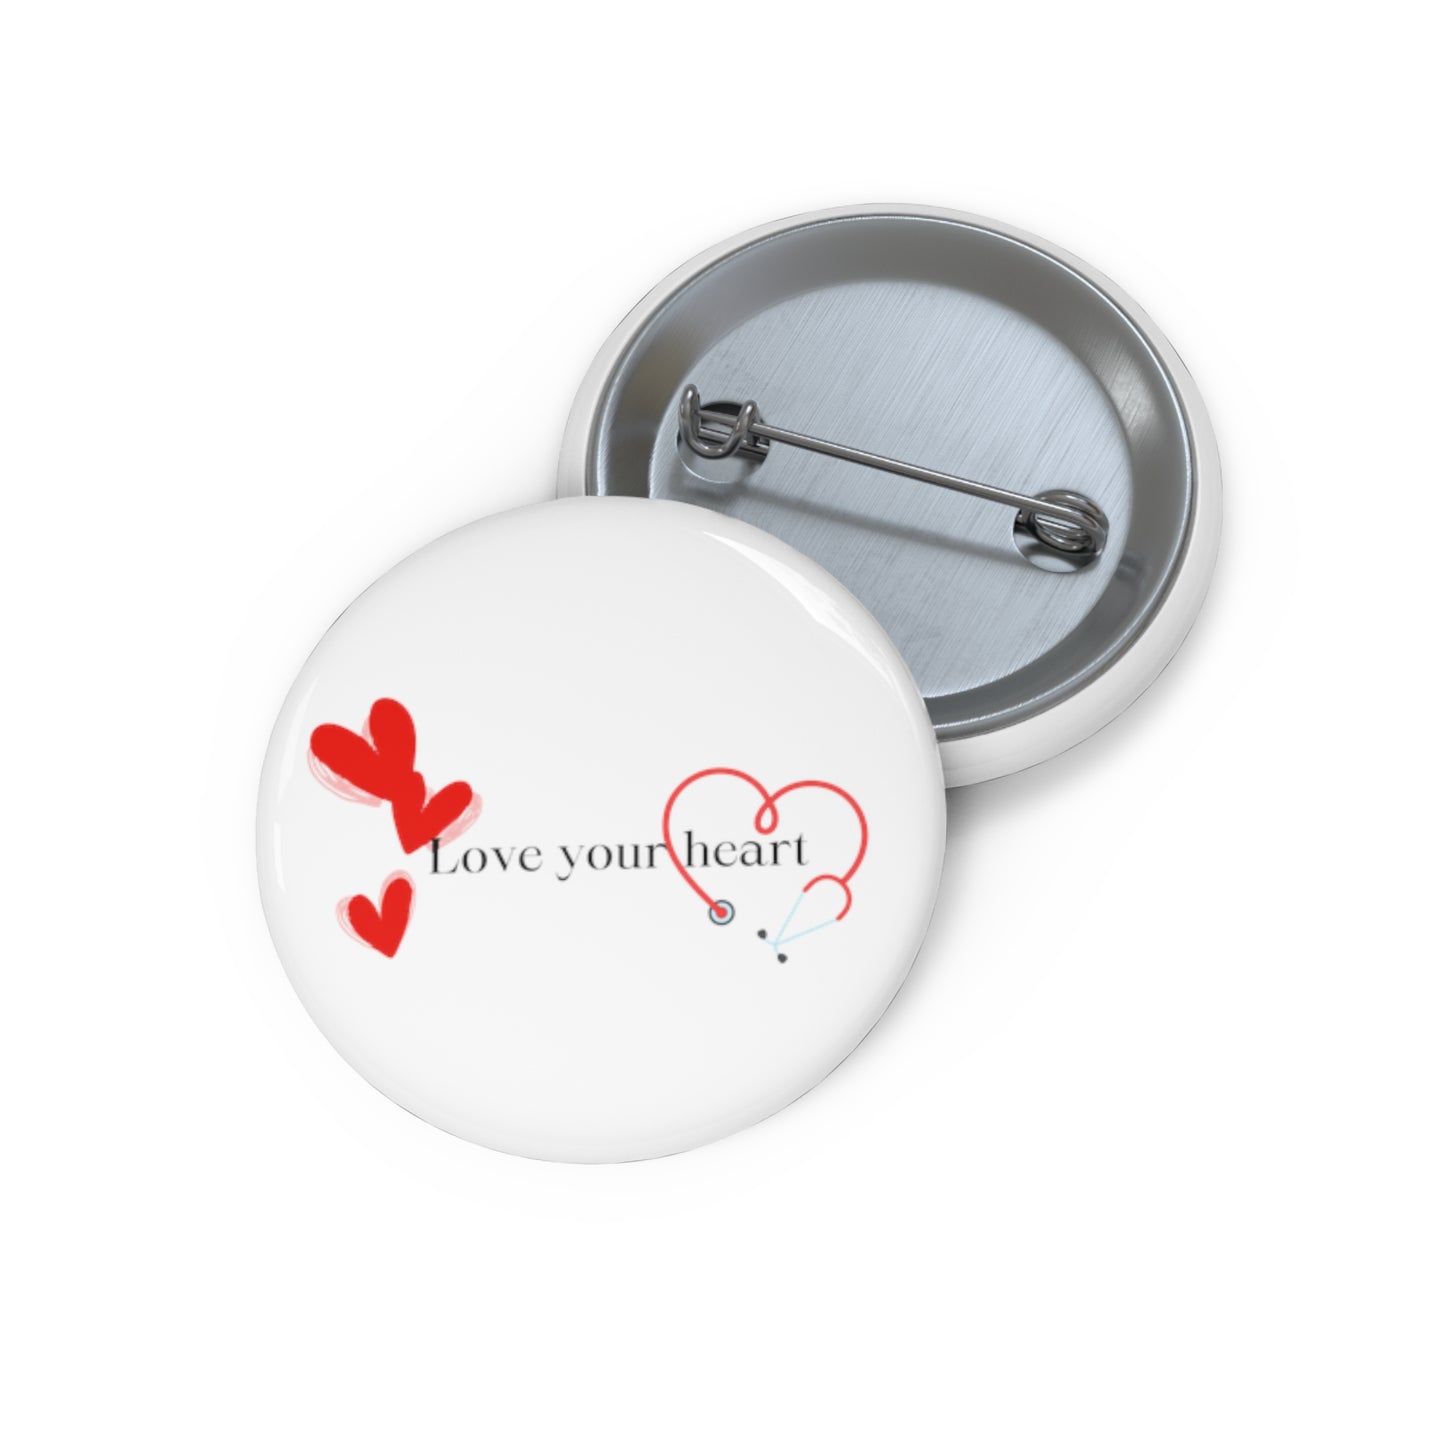 Love your Heart Apparel pin